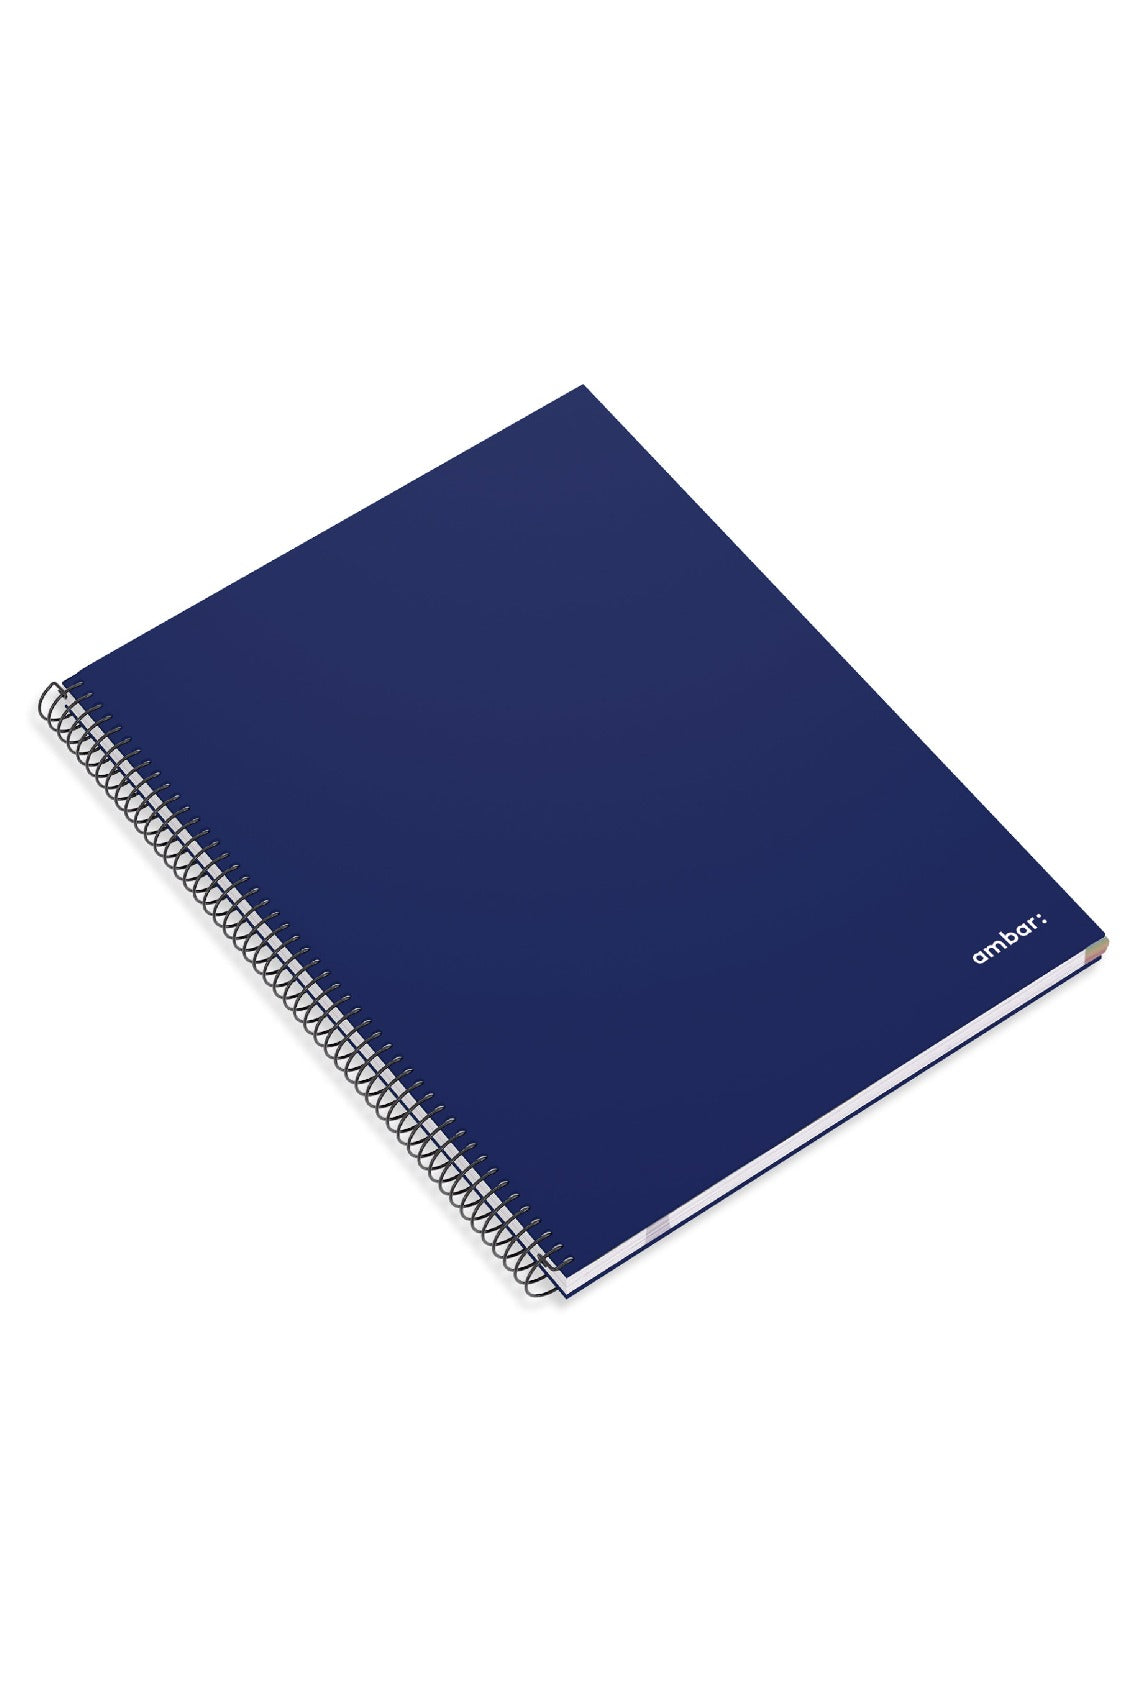 A4 Hardcover Spiral Book Ambar Blue Lined